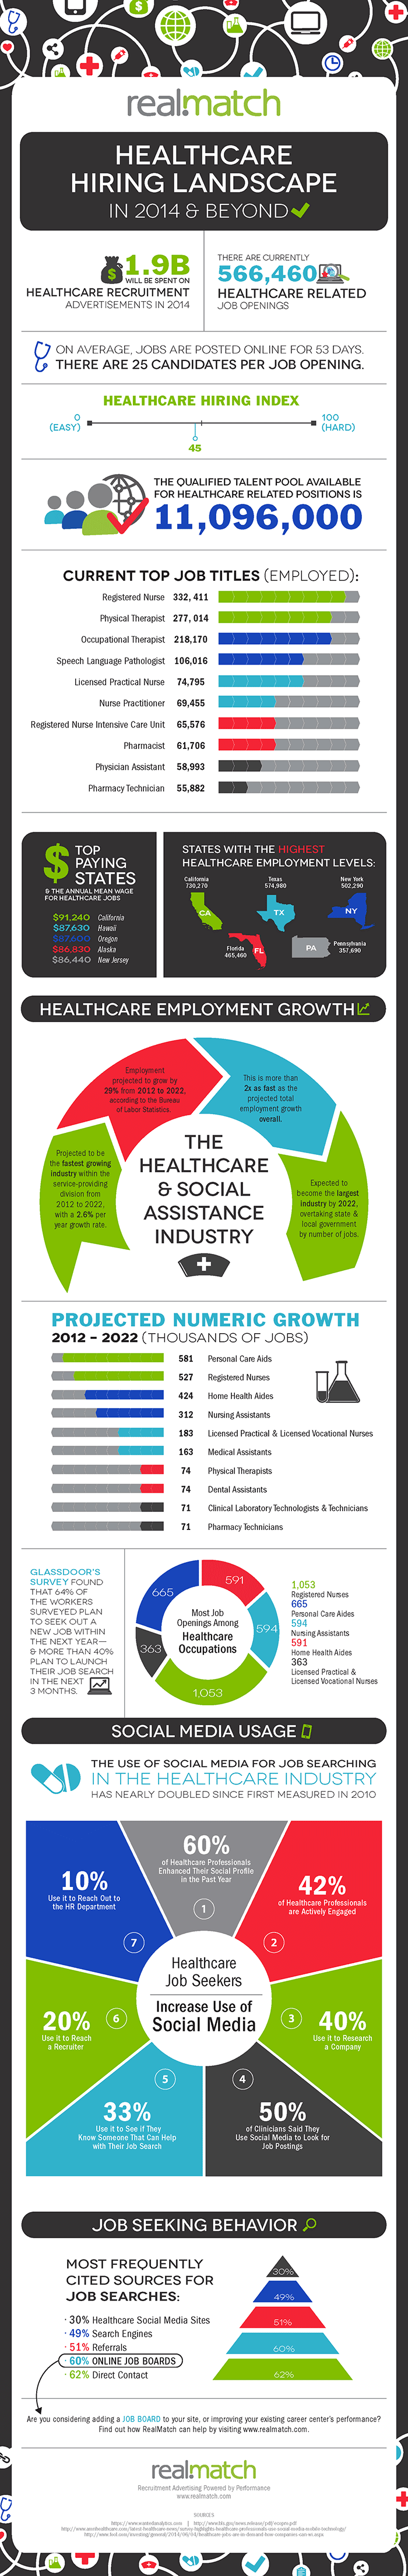 Healthcare-Hiring-Landscape-in-2014-and-Beyond-infographic